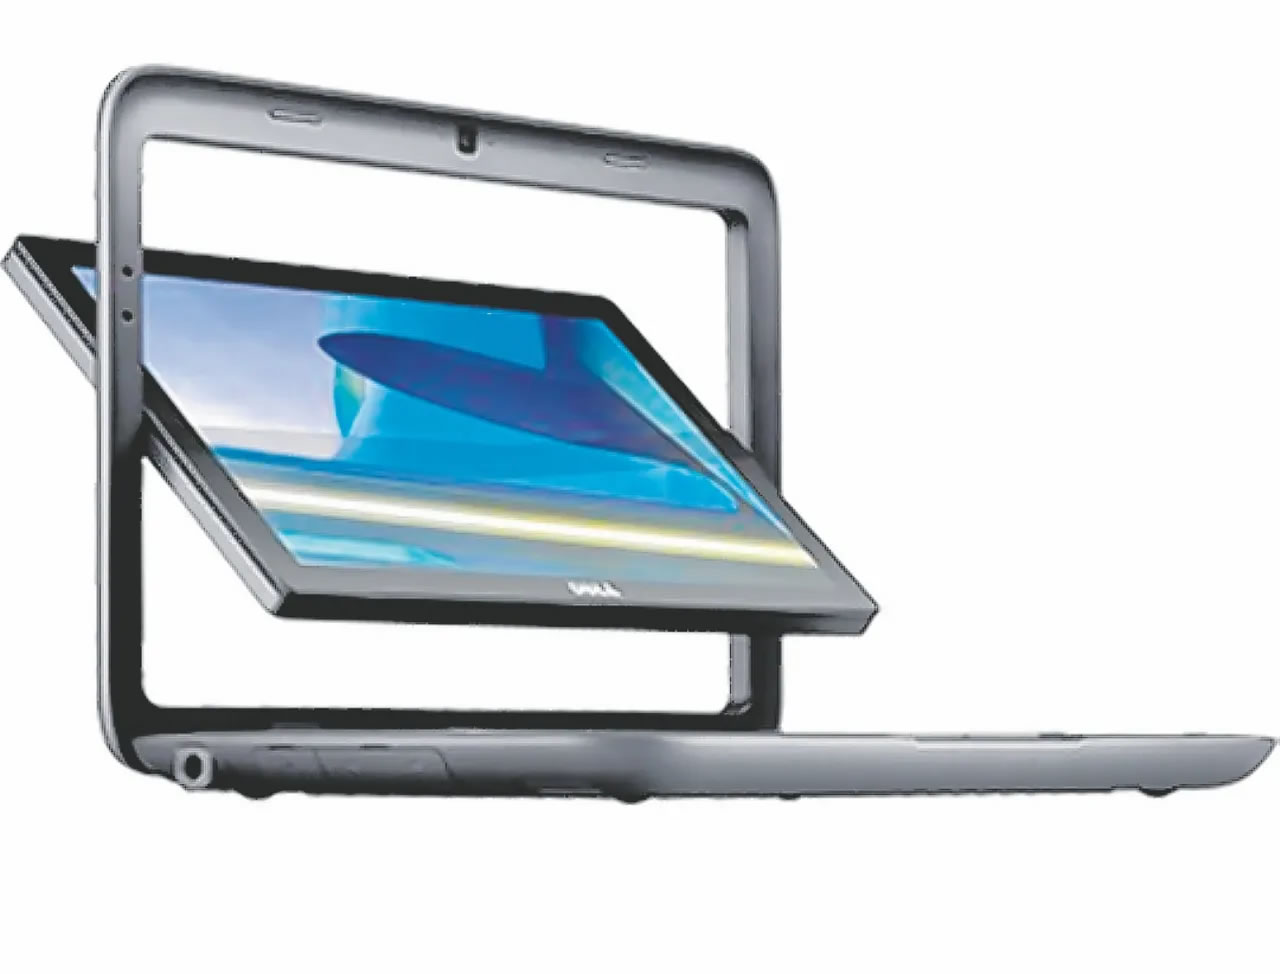 Dell's New 10.1inch Inspiron Duo is a true Convertible!